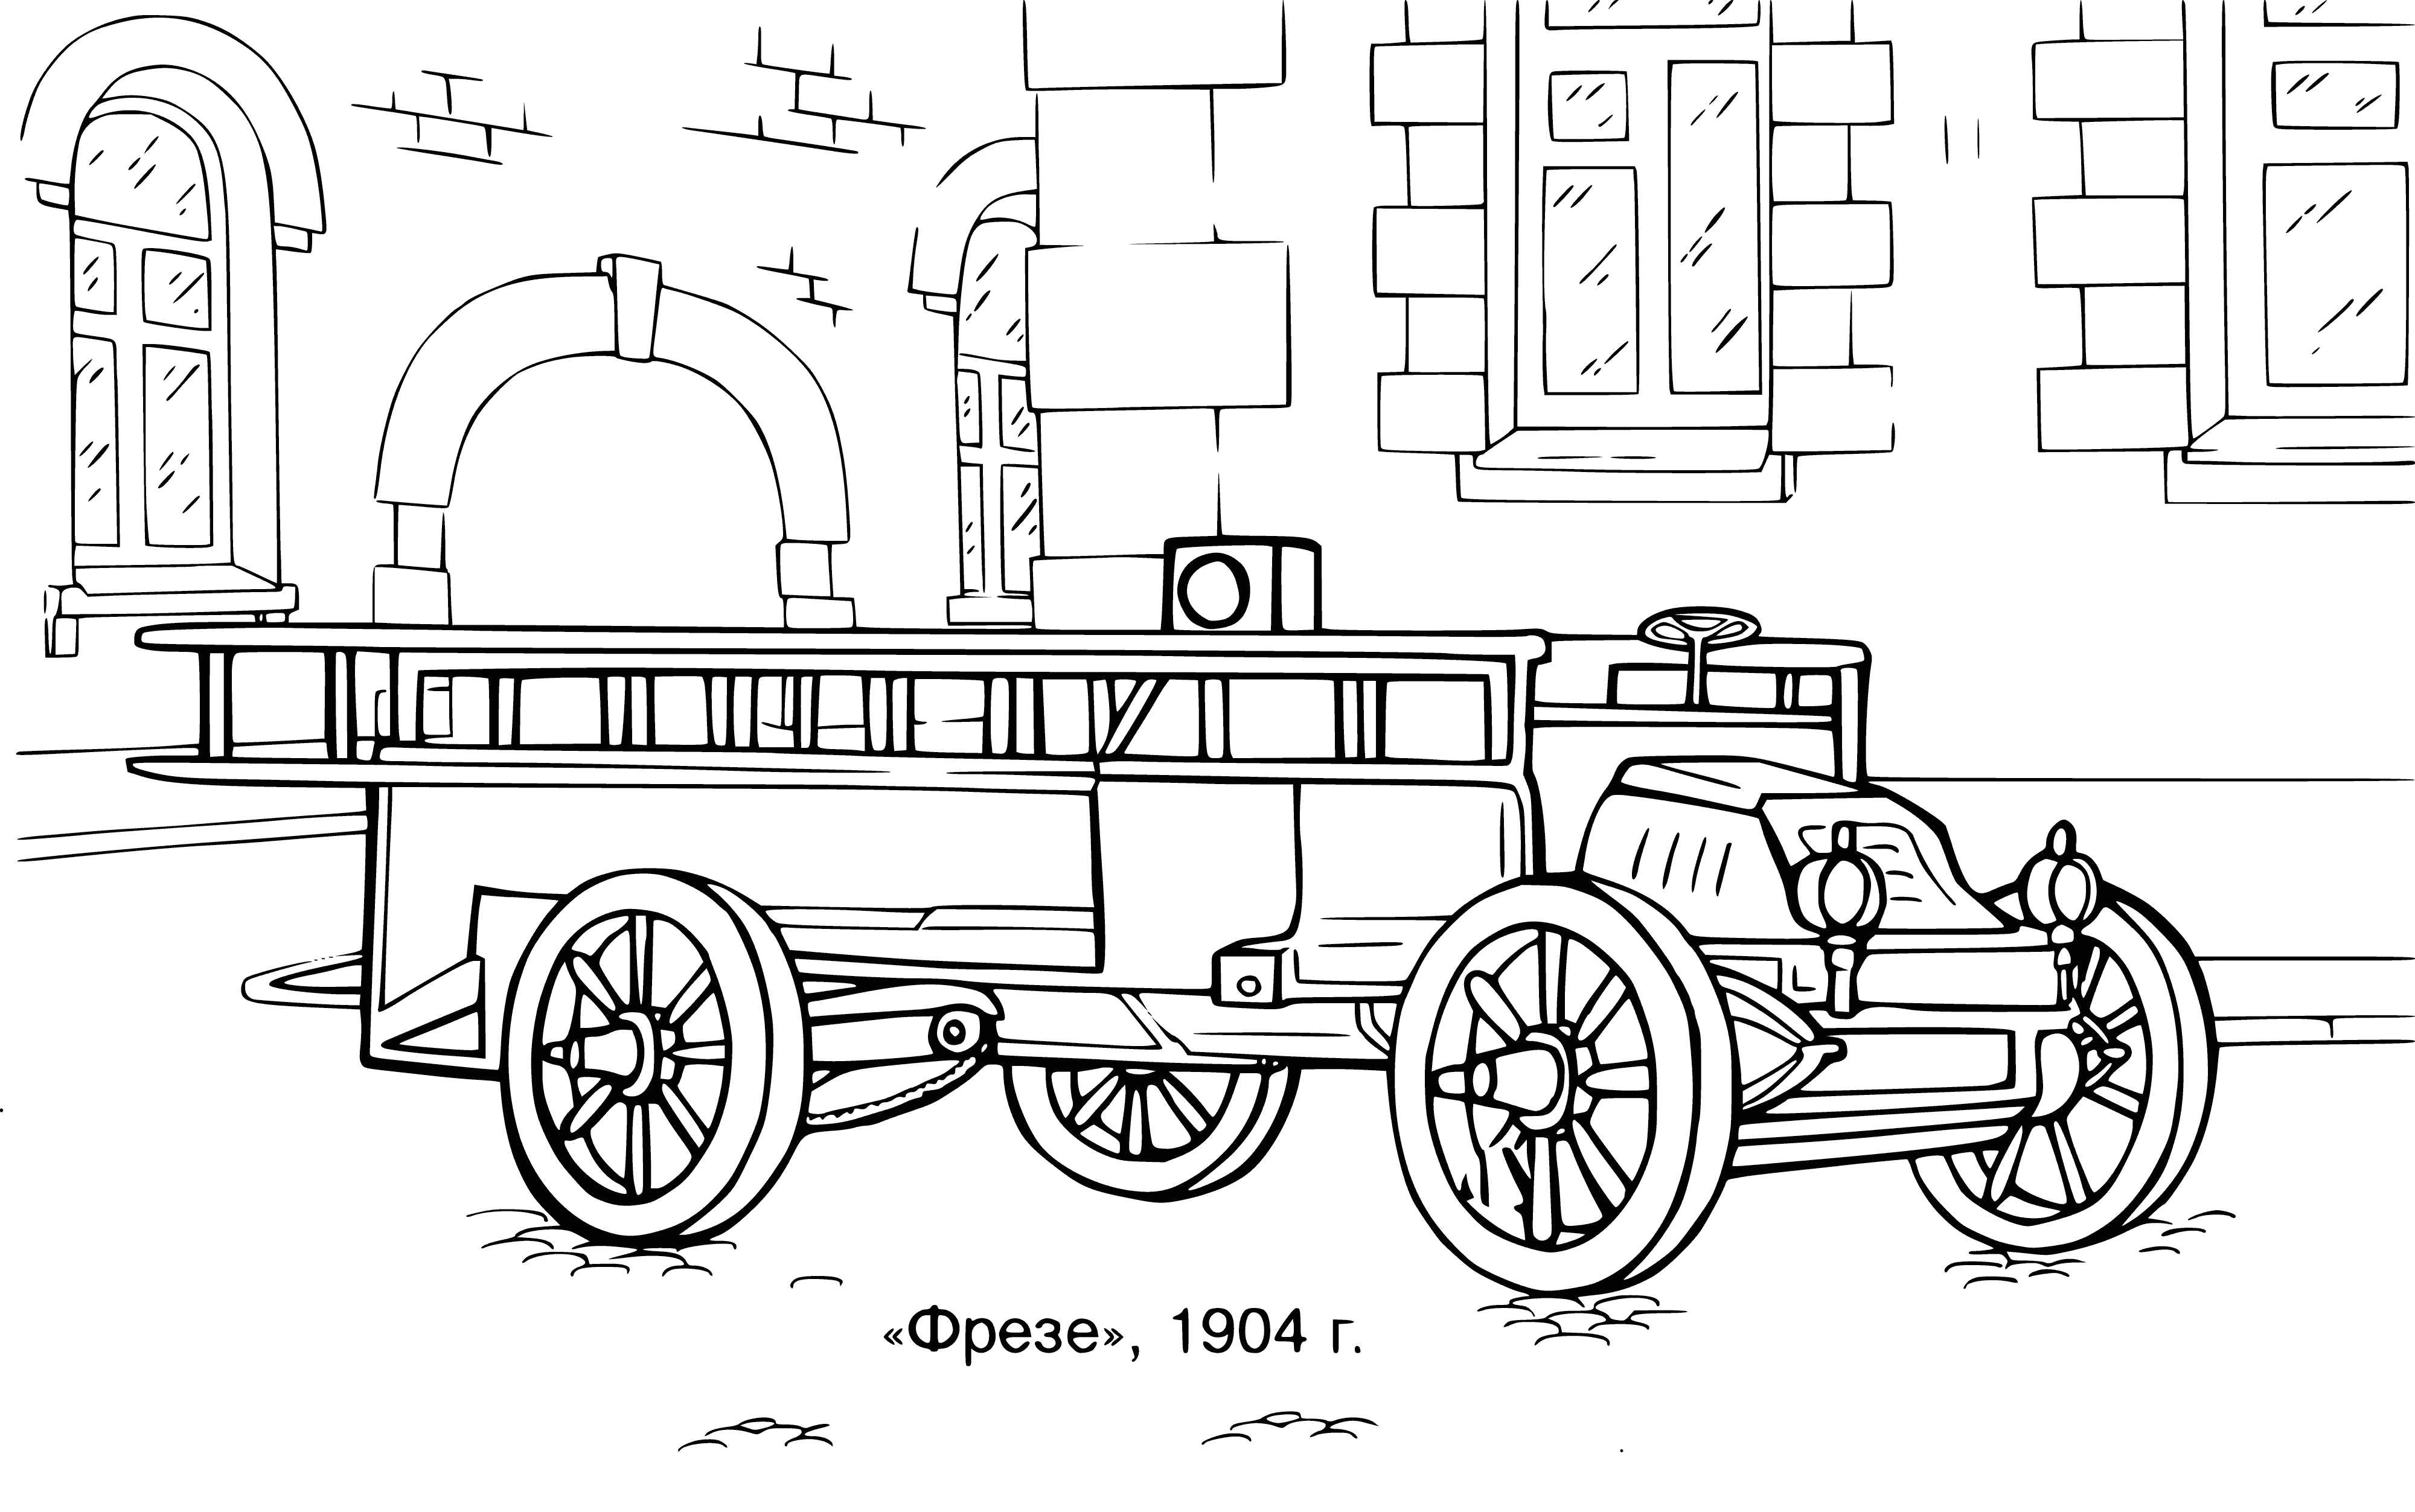 coloring page: Firefighter & police officer in uniforms, holding fire hose & night stick, stand at a writing desk with papers.